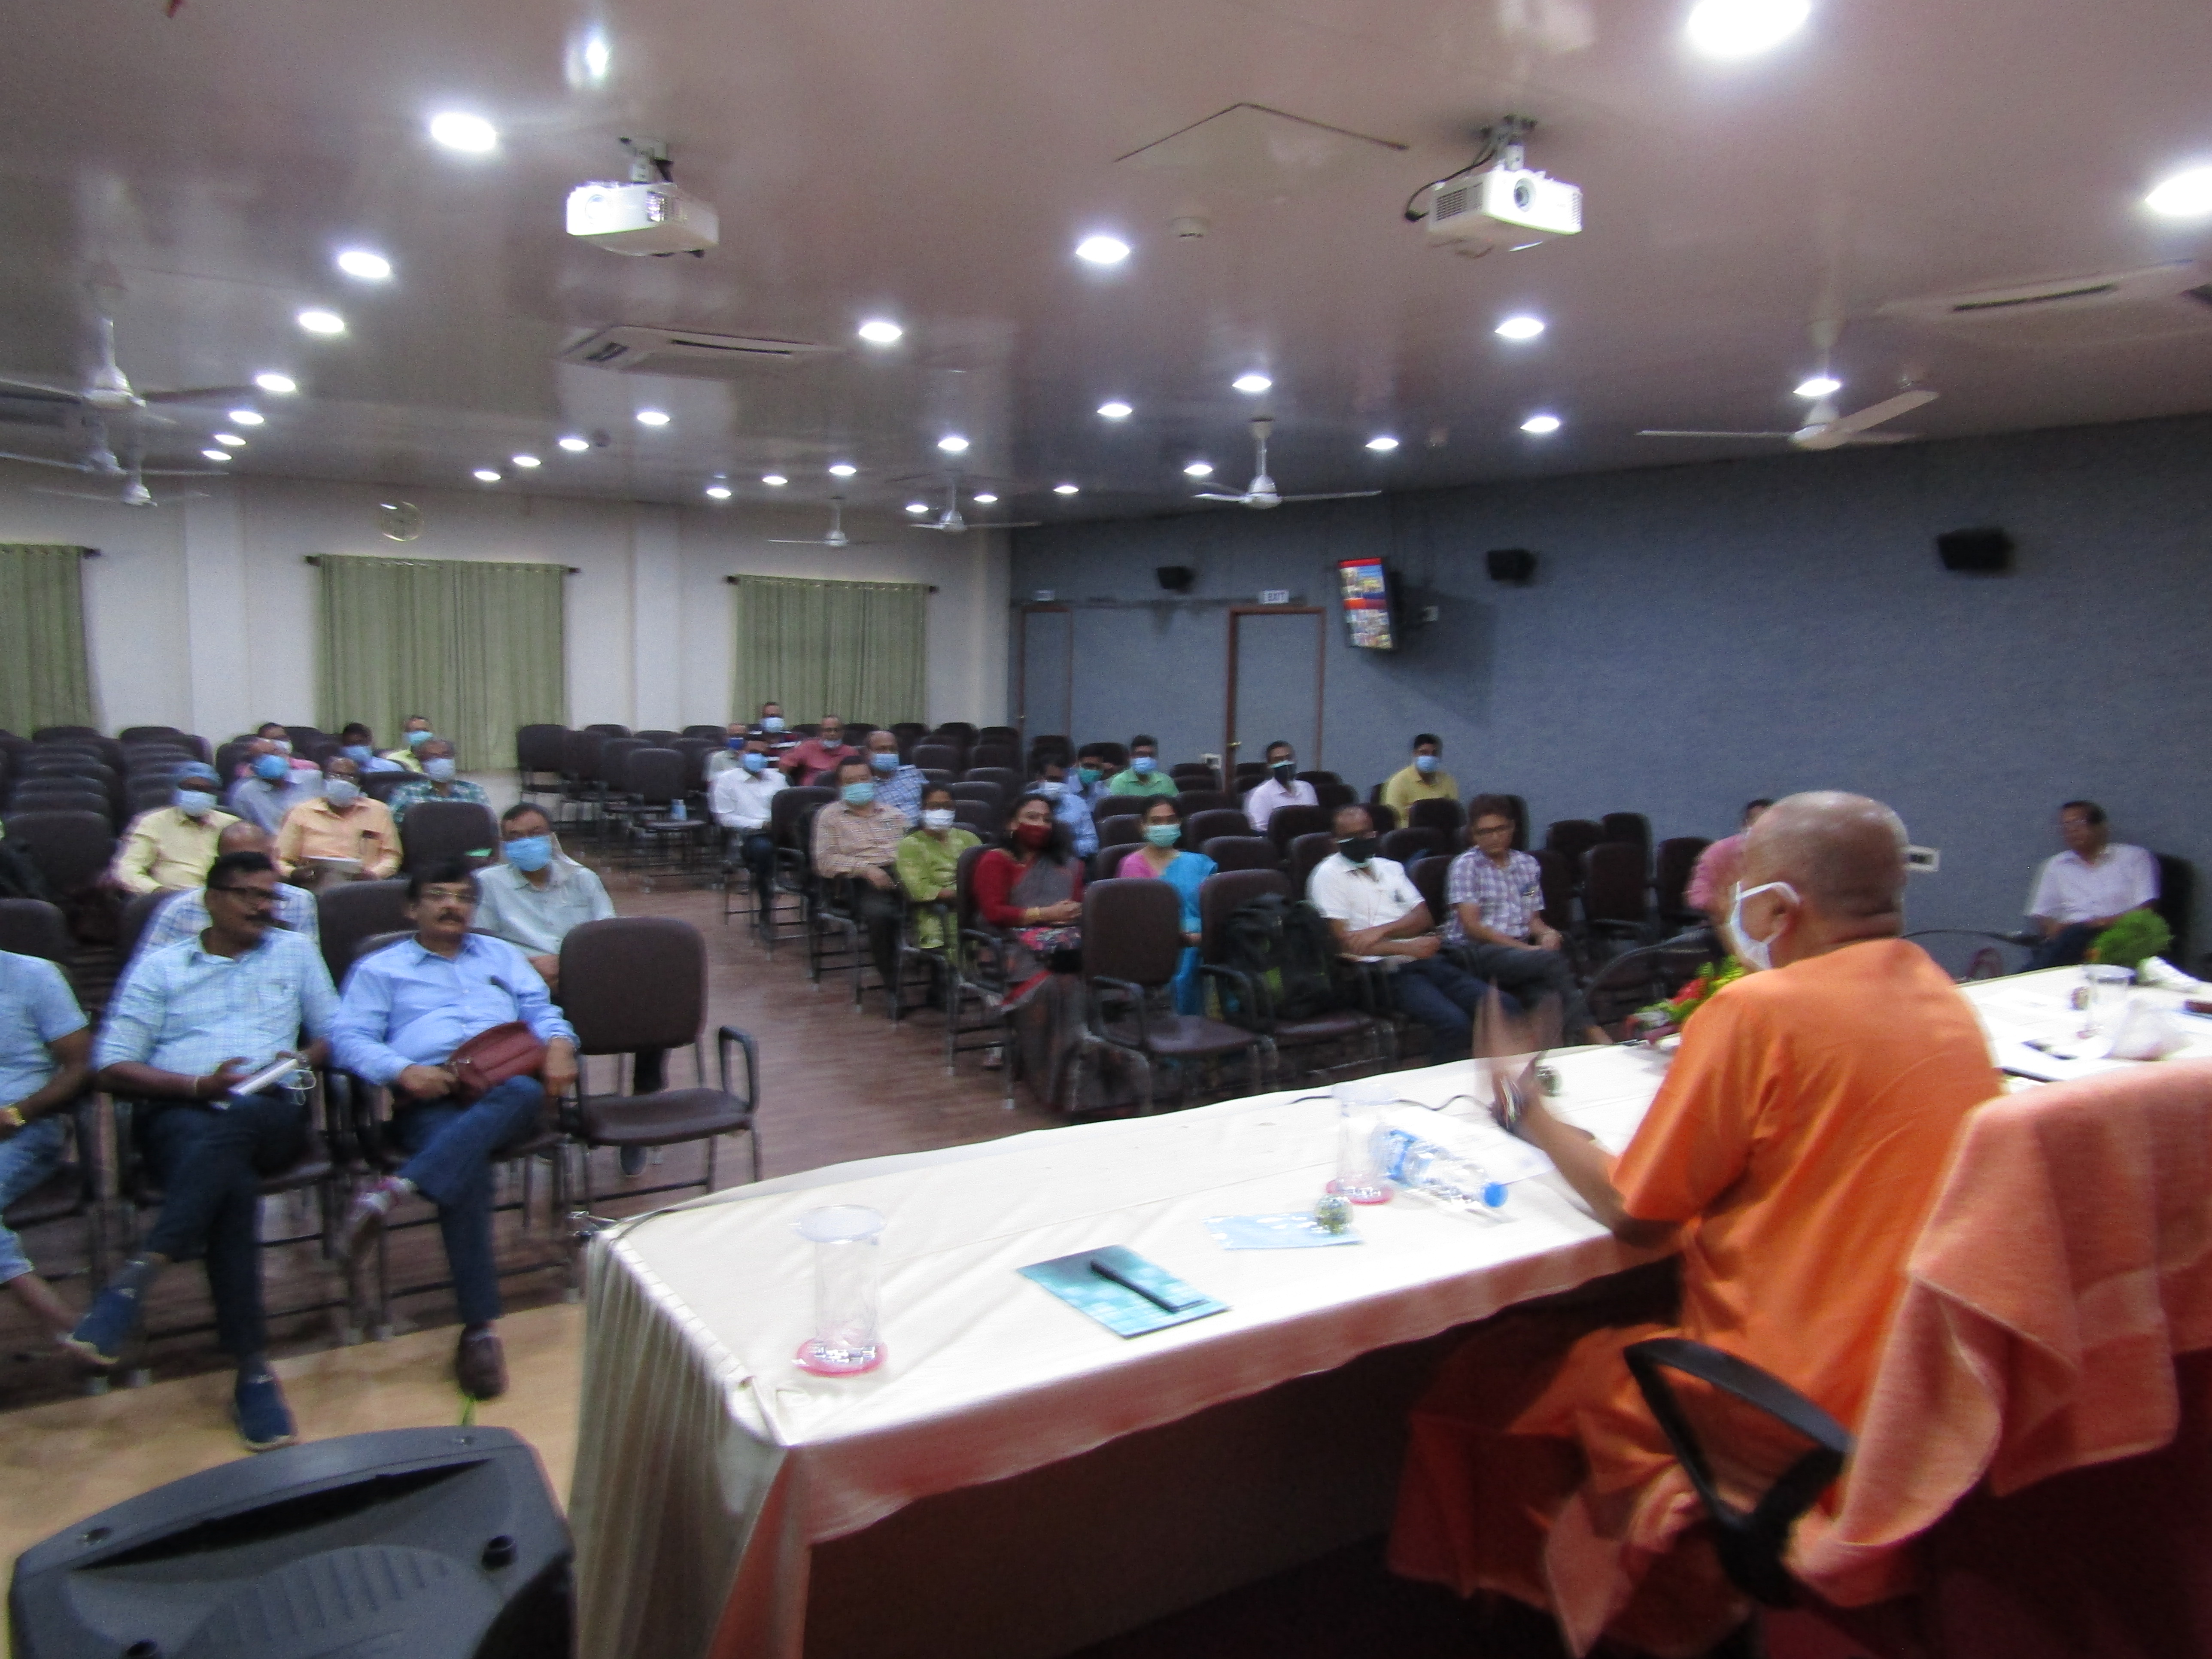 ATMA REVIEW WORKSHOP ON 7/10/2021 